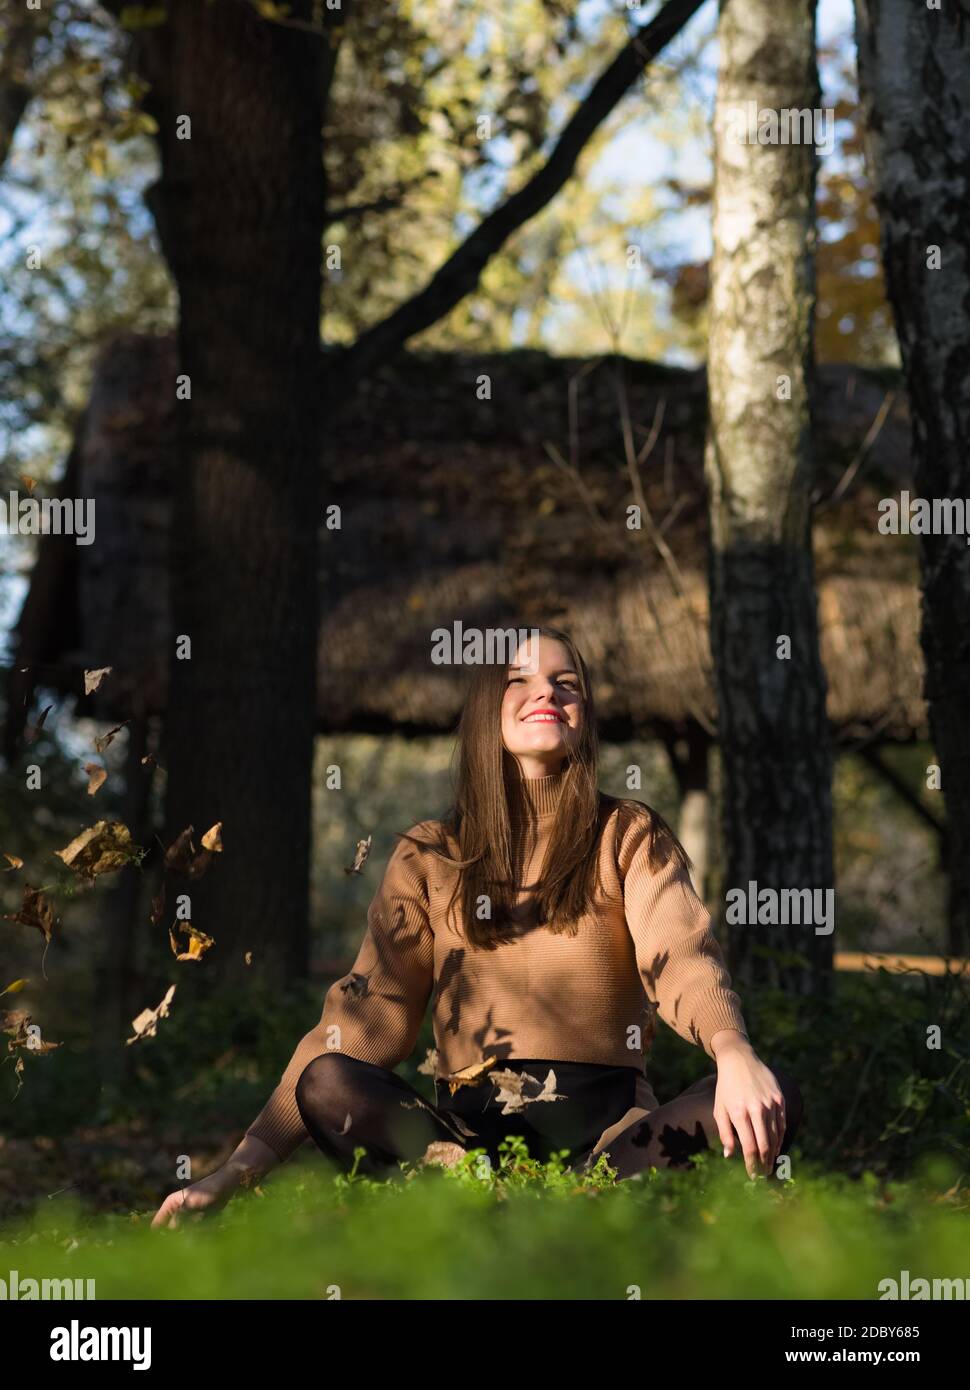 Young Beautiful Long Haired Brunette Woman Sitting in the Forest with Falling Leaves Stock Photo